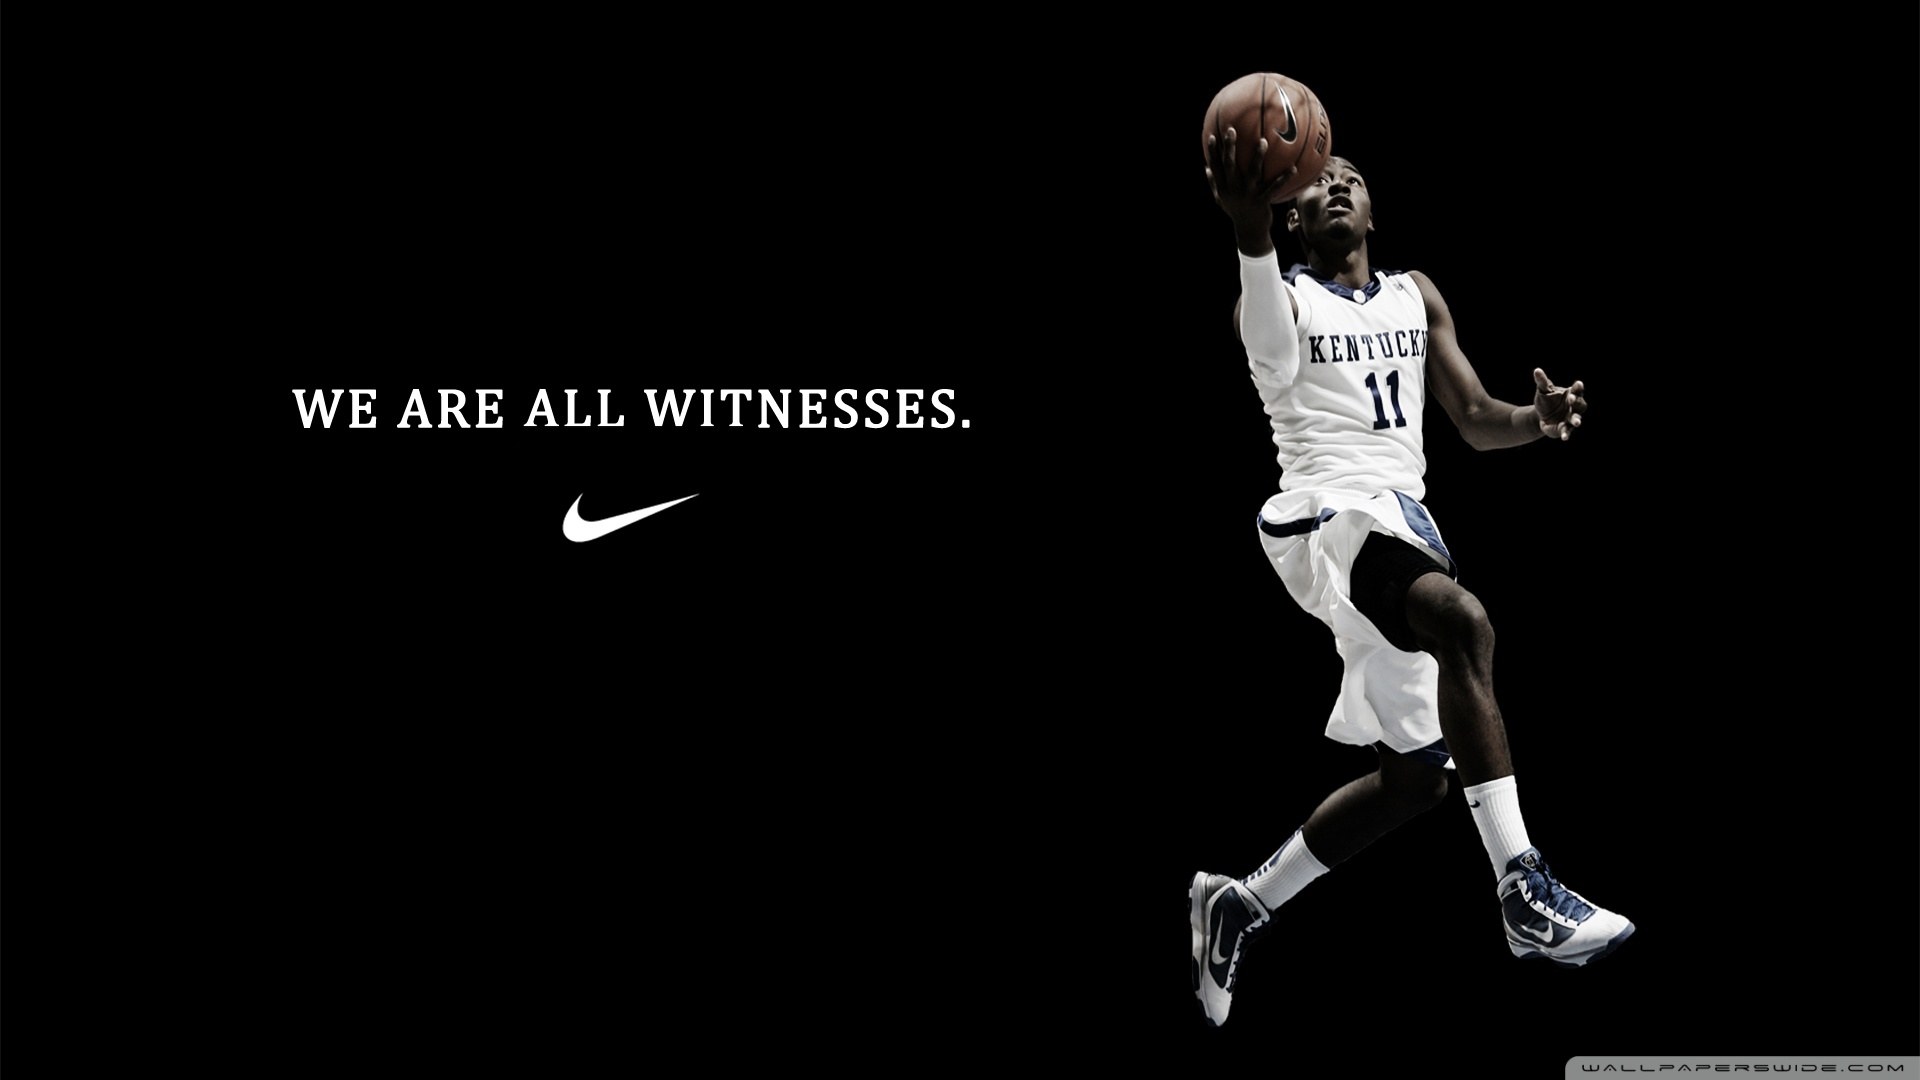 We Are All Witnesses HD Wallpaper Sport Nba Basketball